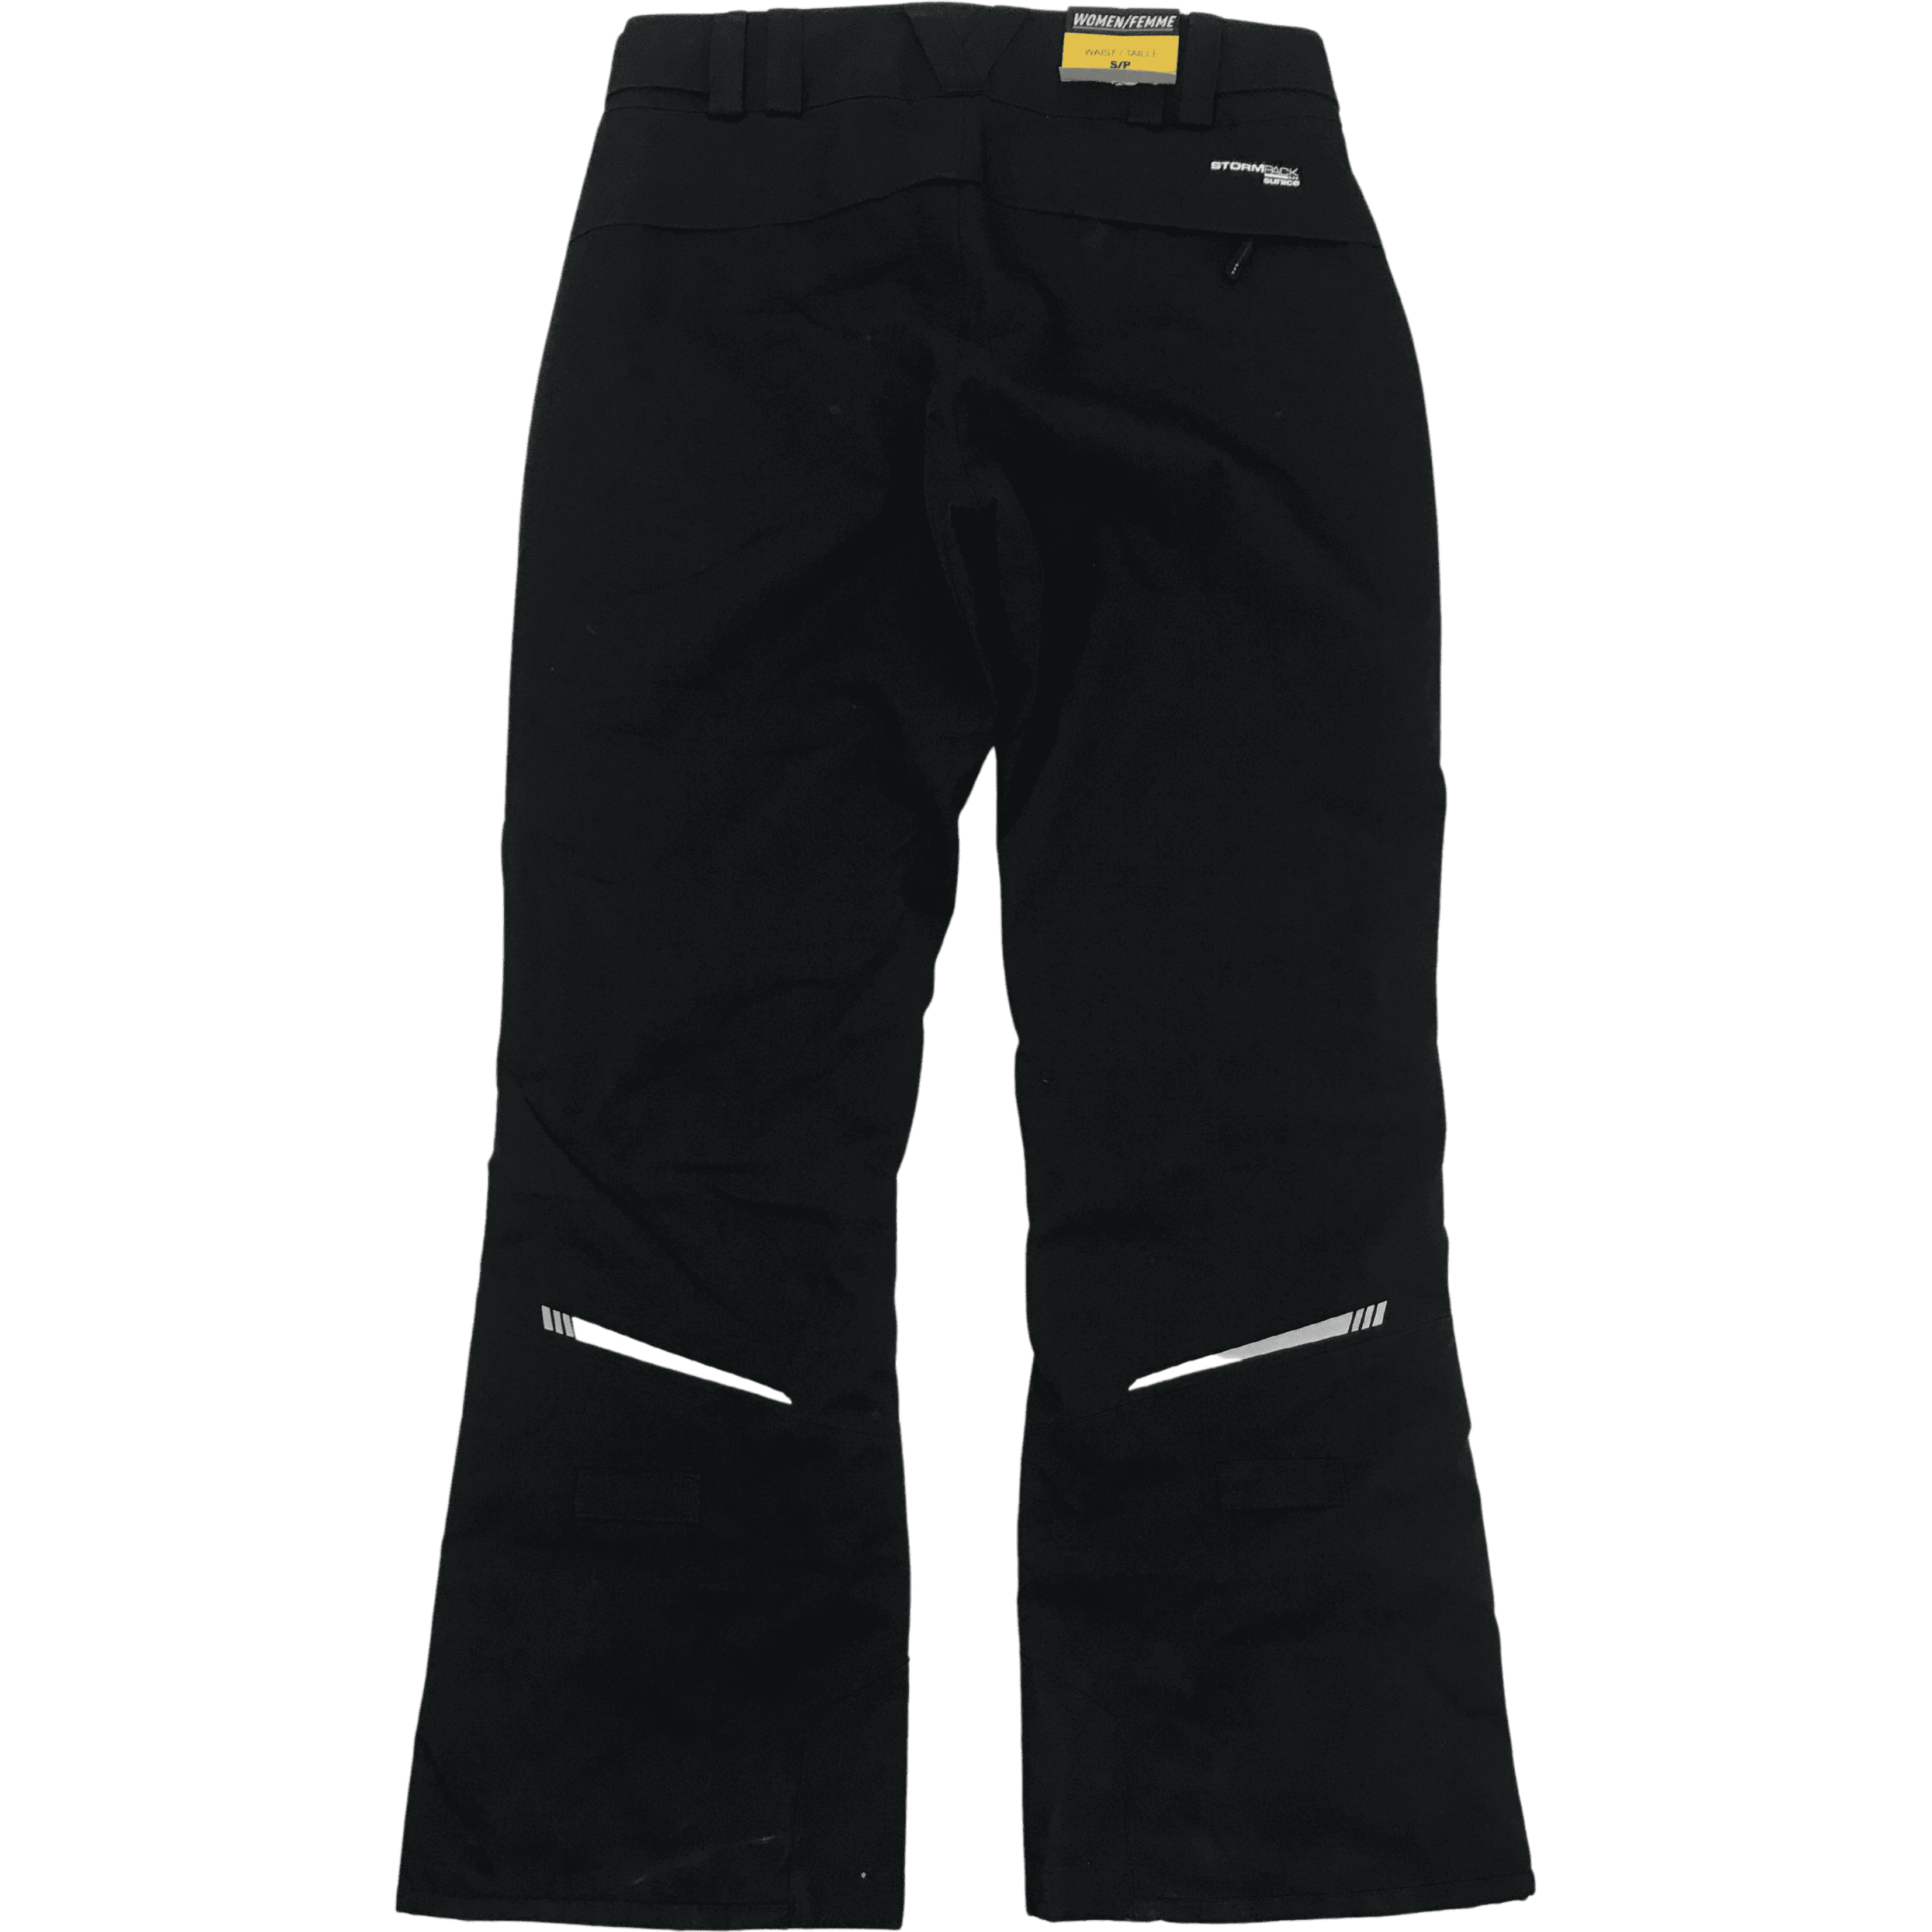 https://www.canadawideliquidations.com/wp-content/uploads/2021/09/products-snowpants05.png